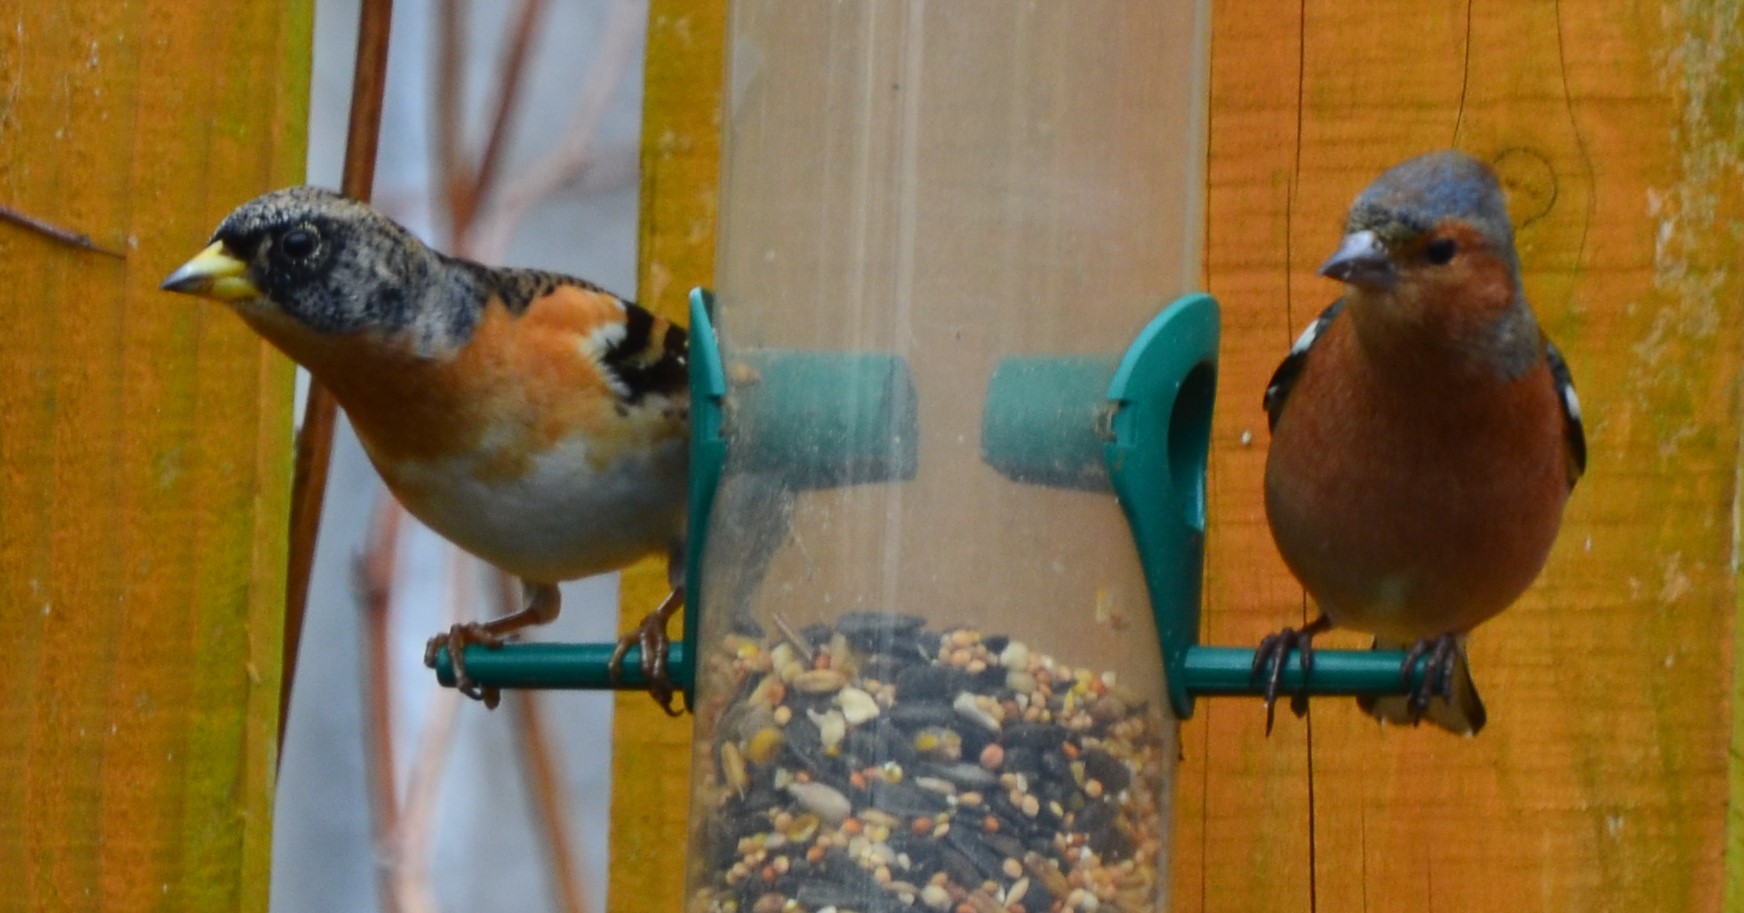 Brambling (left) and Chaffinch (right) (c) Jim Ness